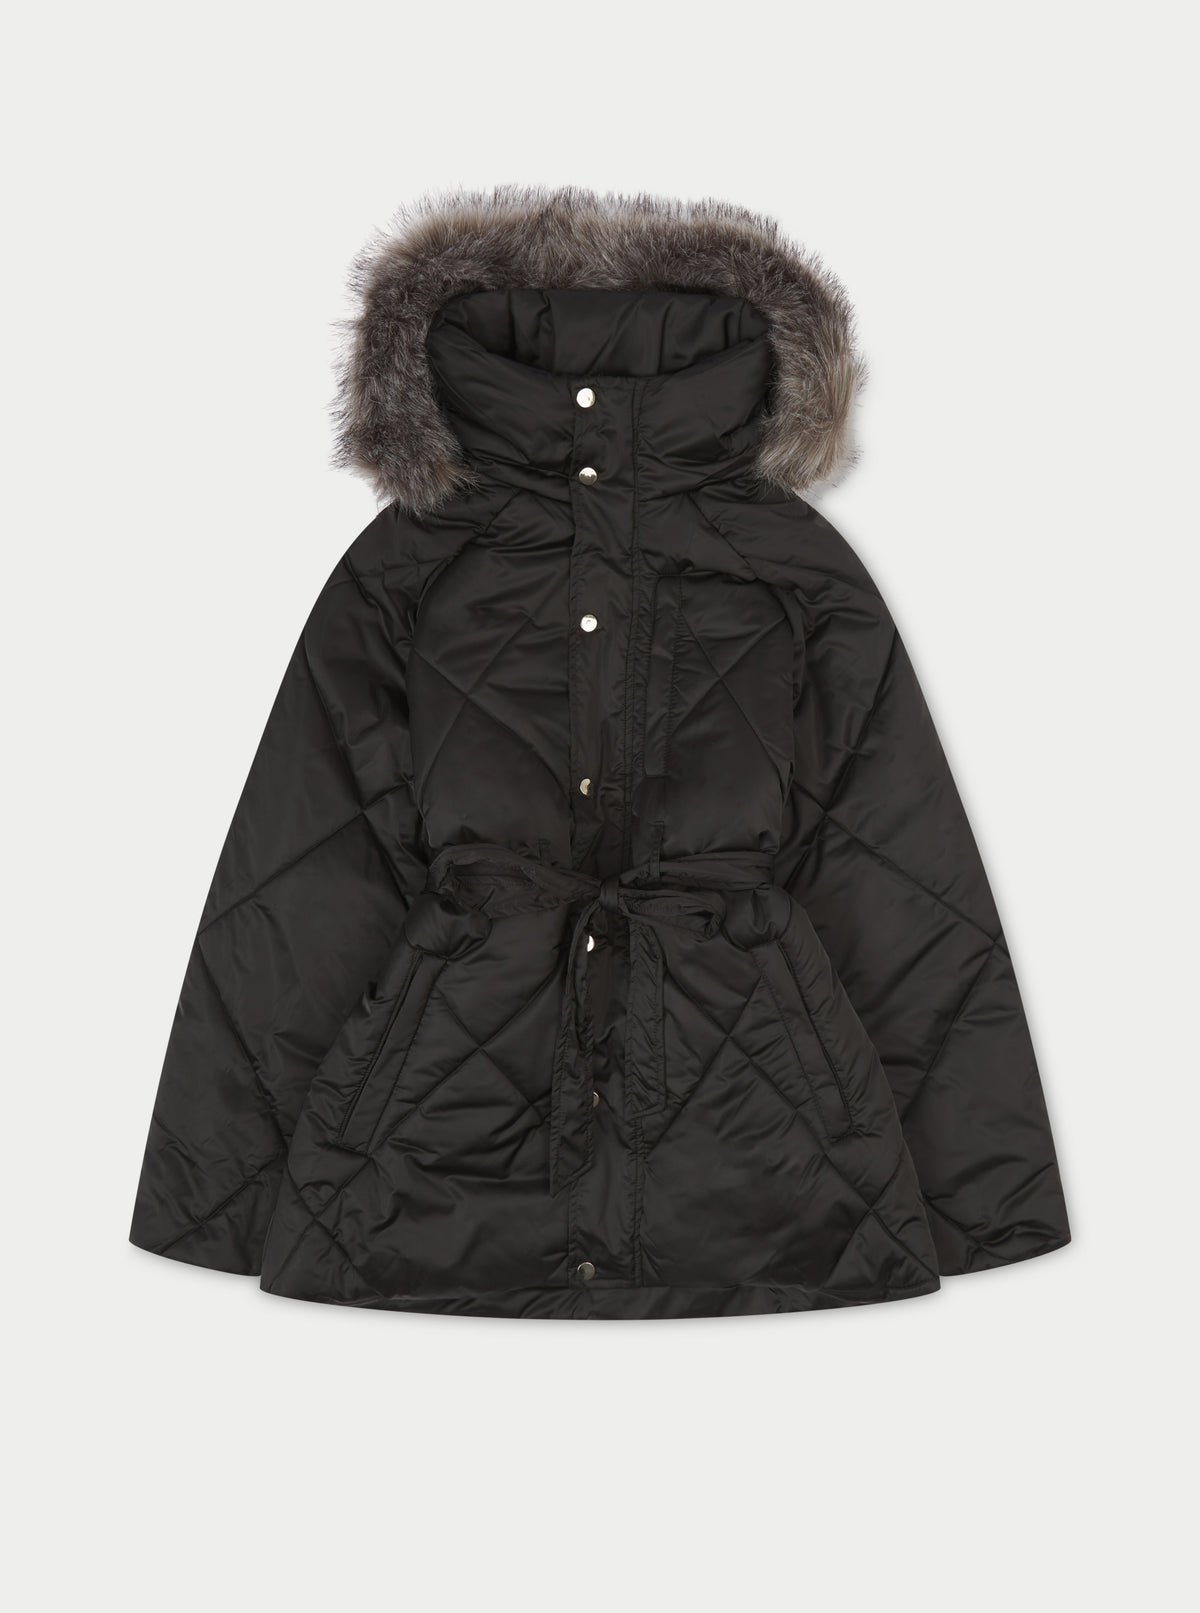 Black Oversize Fur Hooded Parka Jacket | The Couture Club